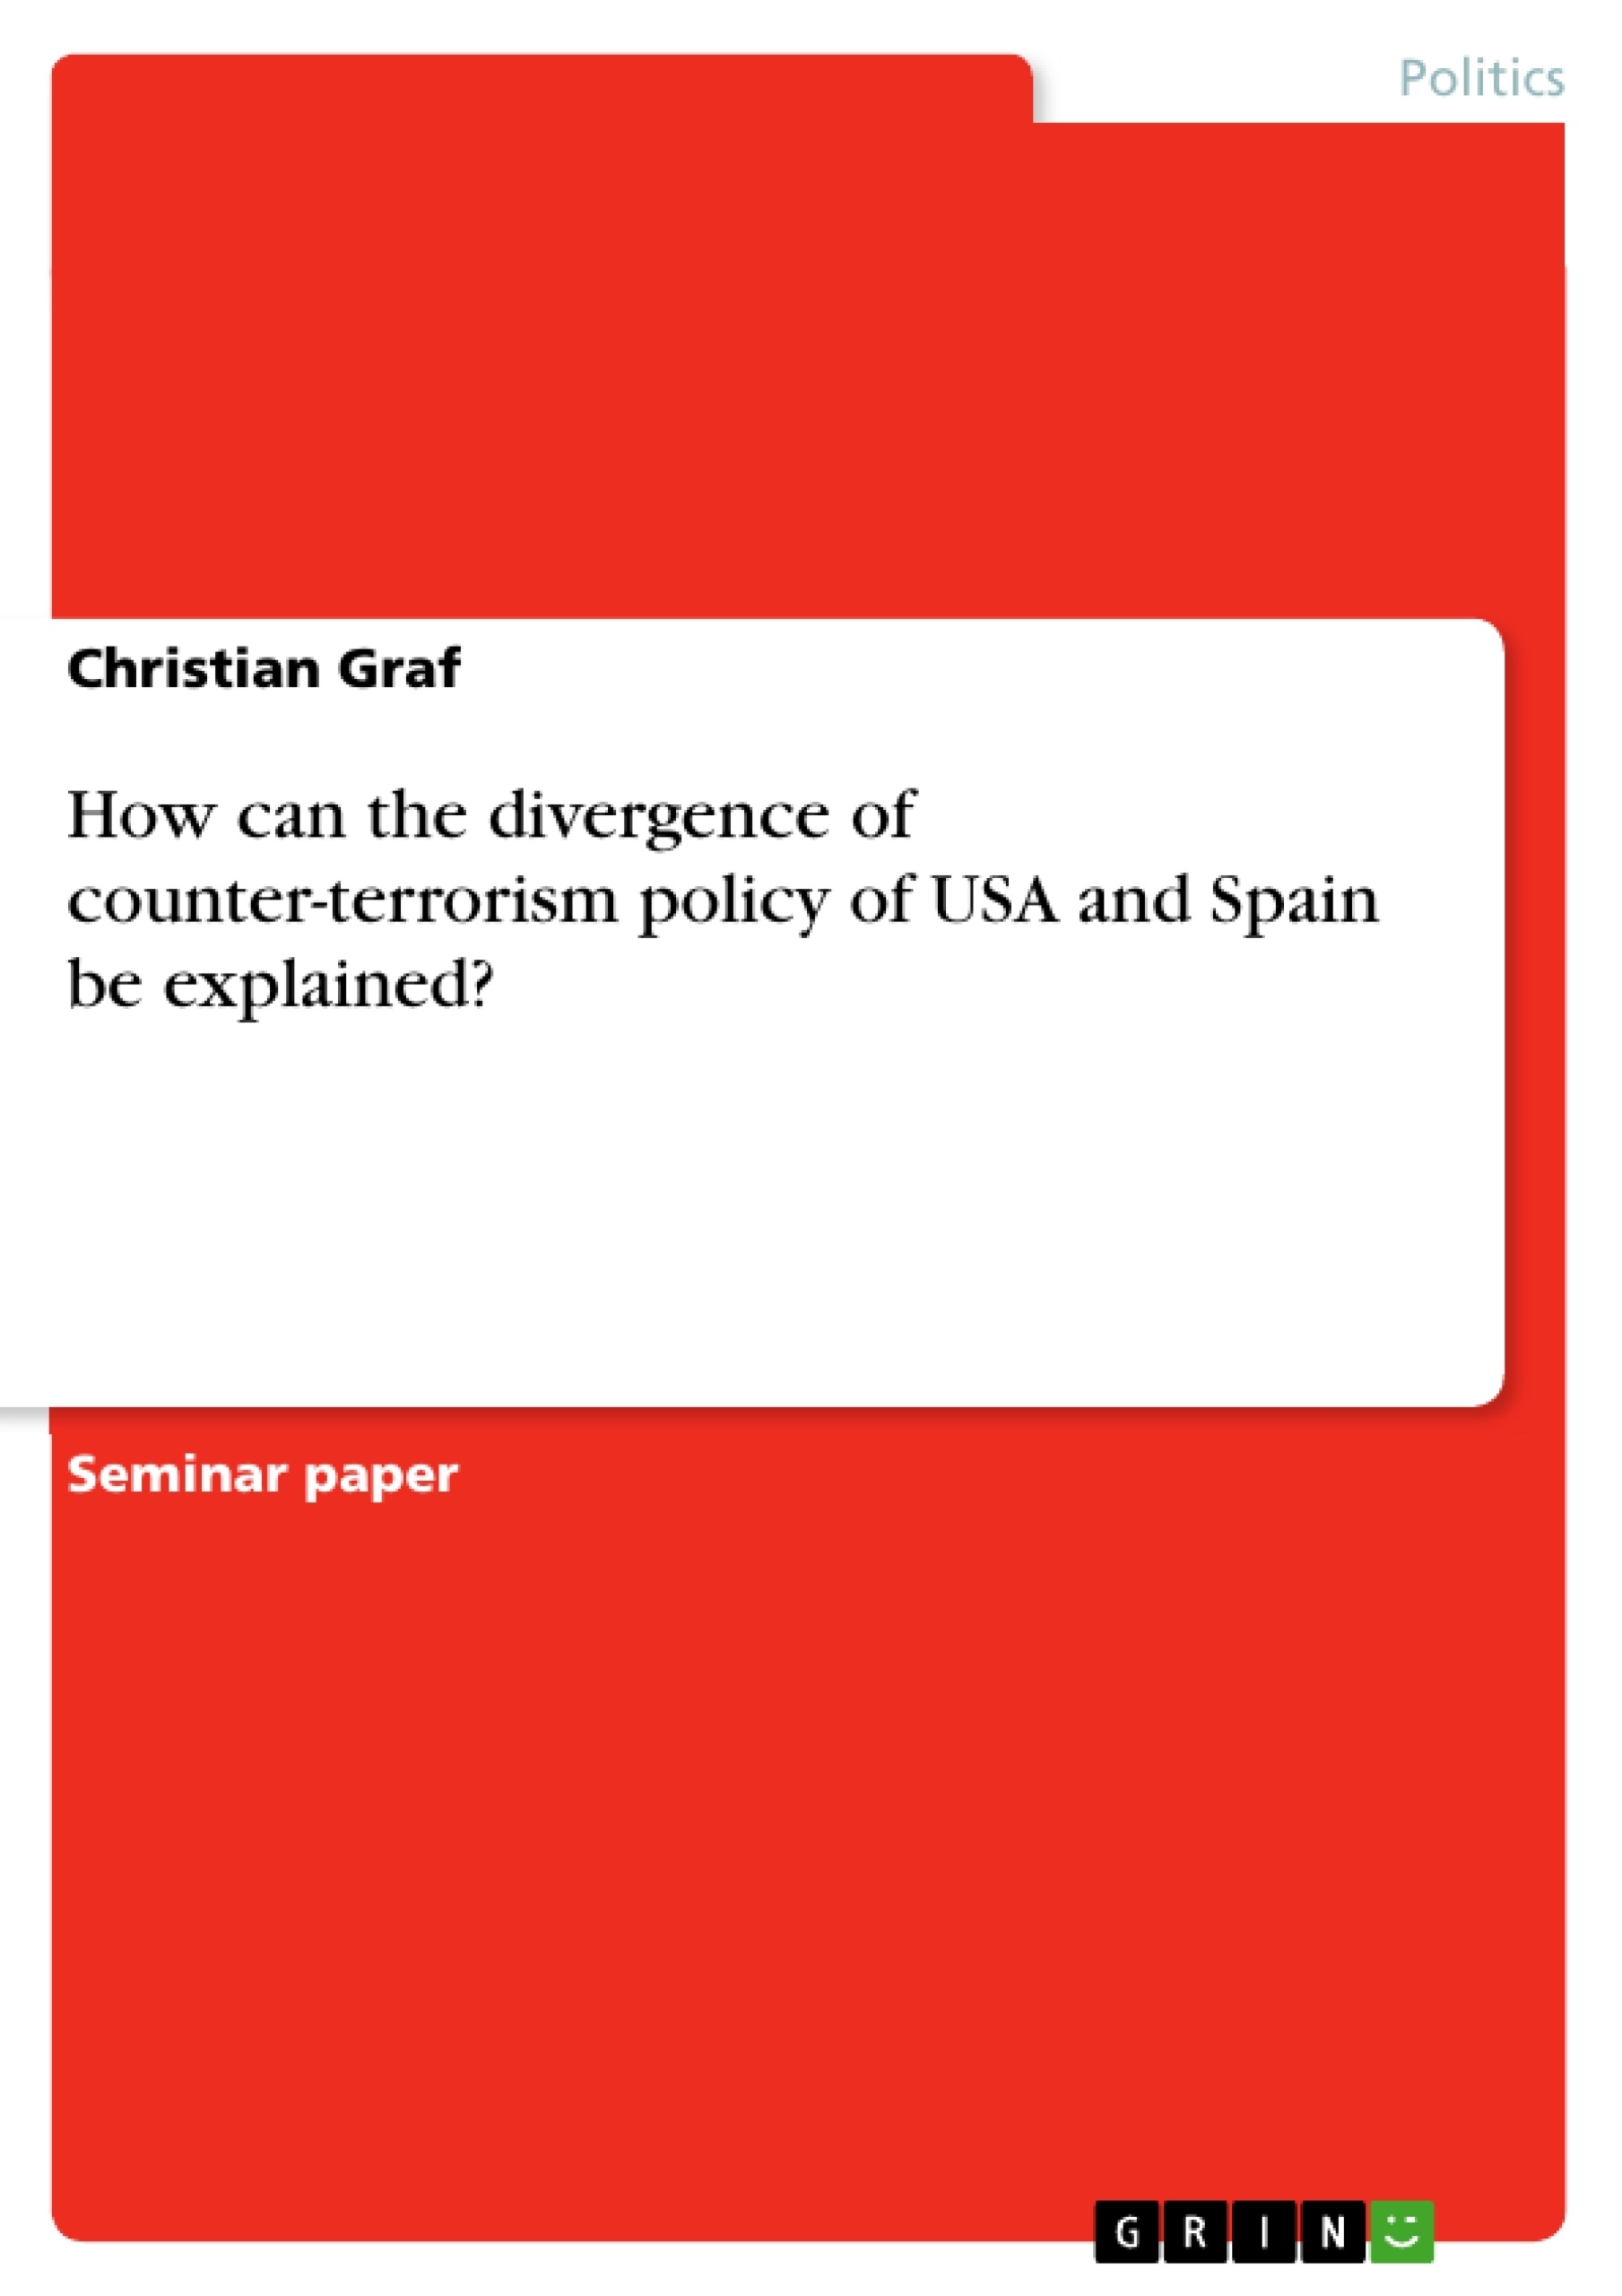 Title: How can the divergence of counter-terrorism policy of USA and Spain be explained?